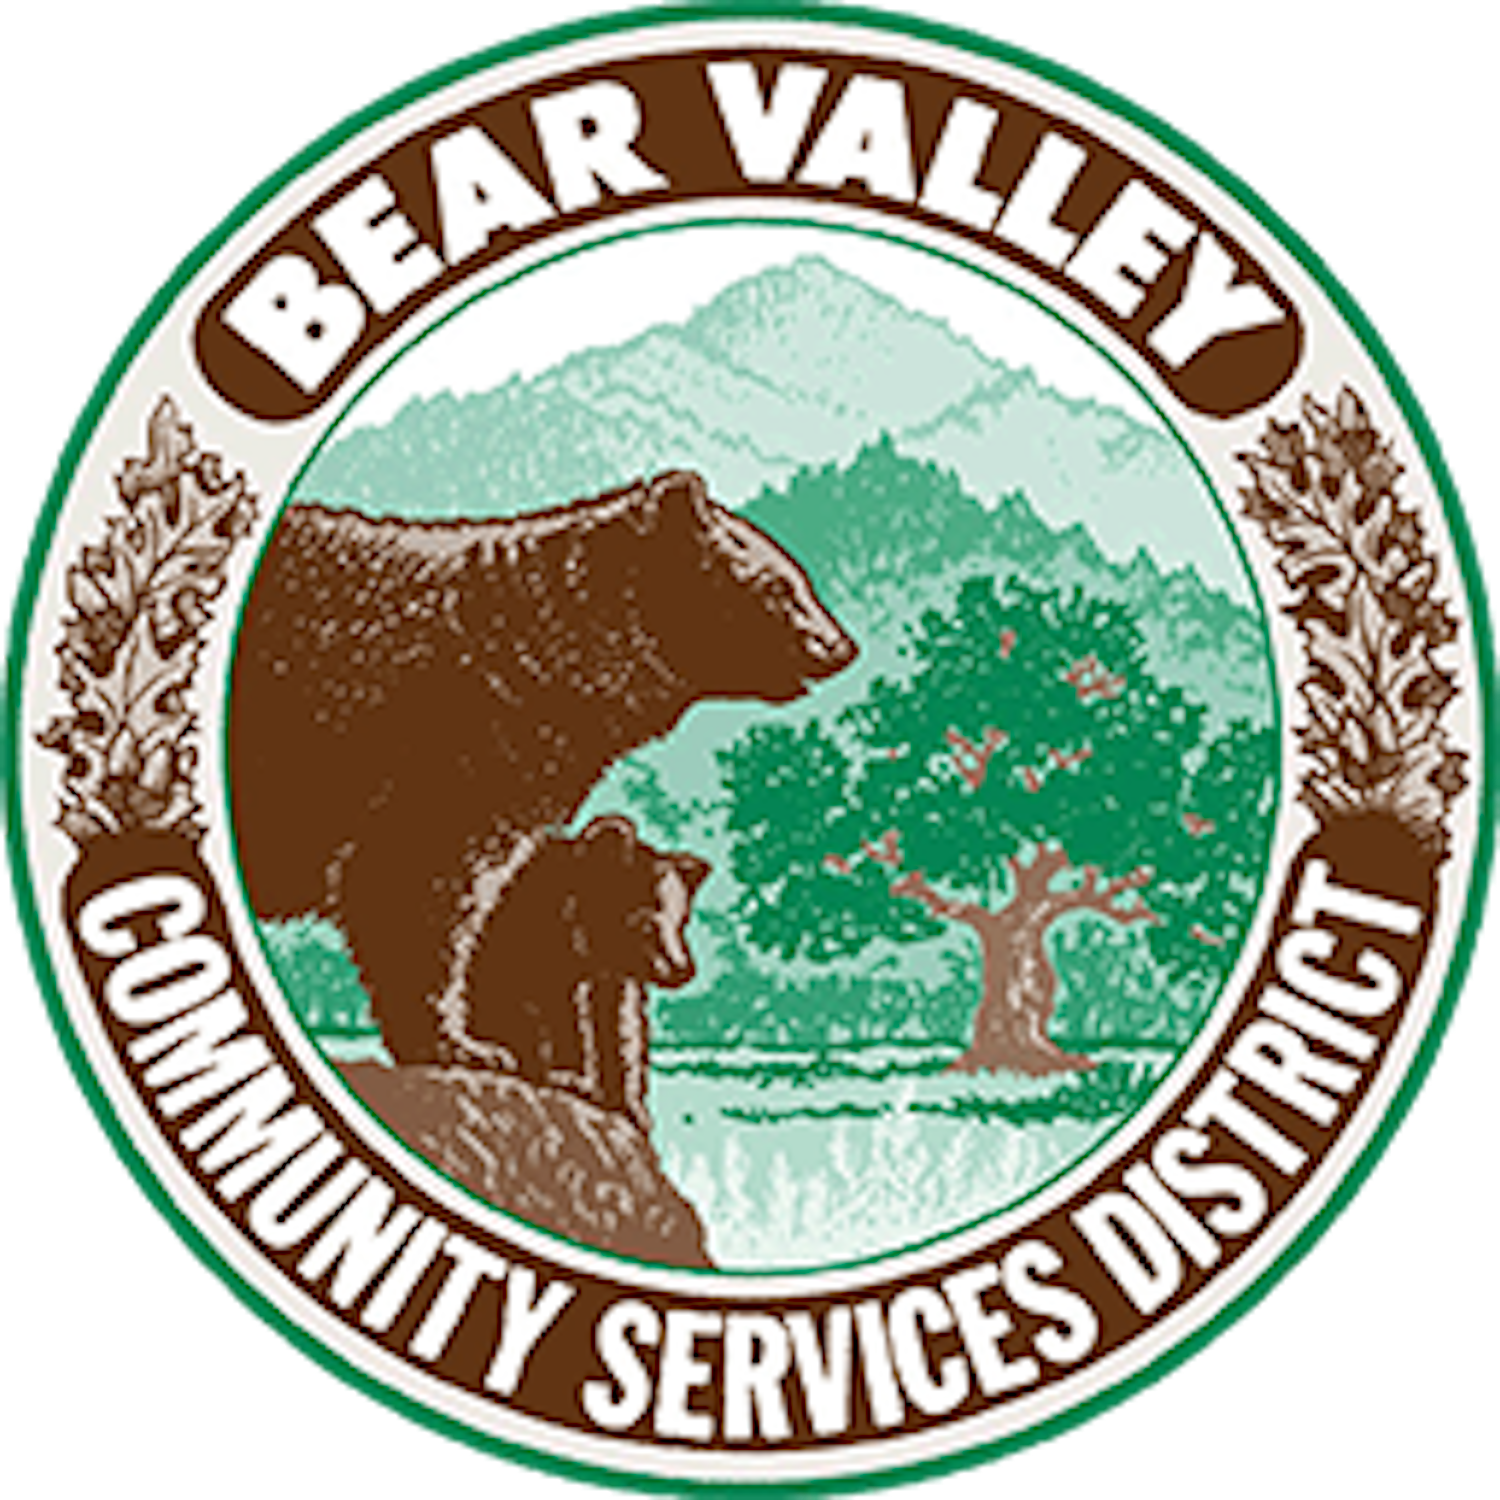 The Bear Valley Exchange